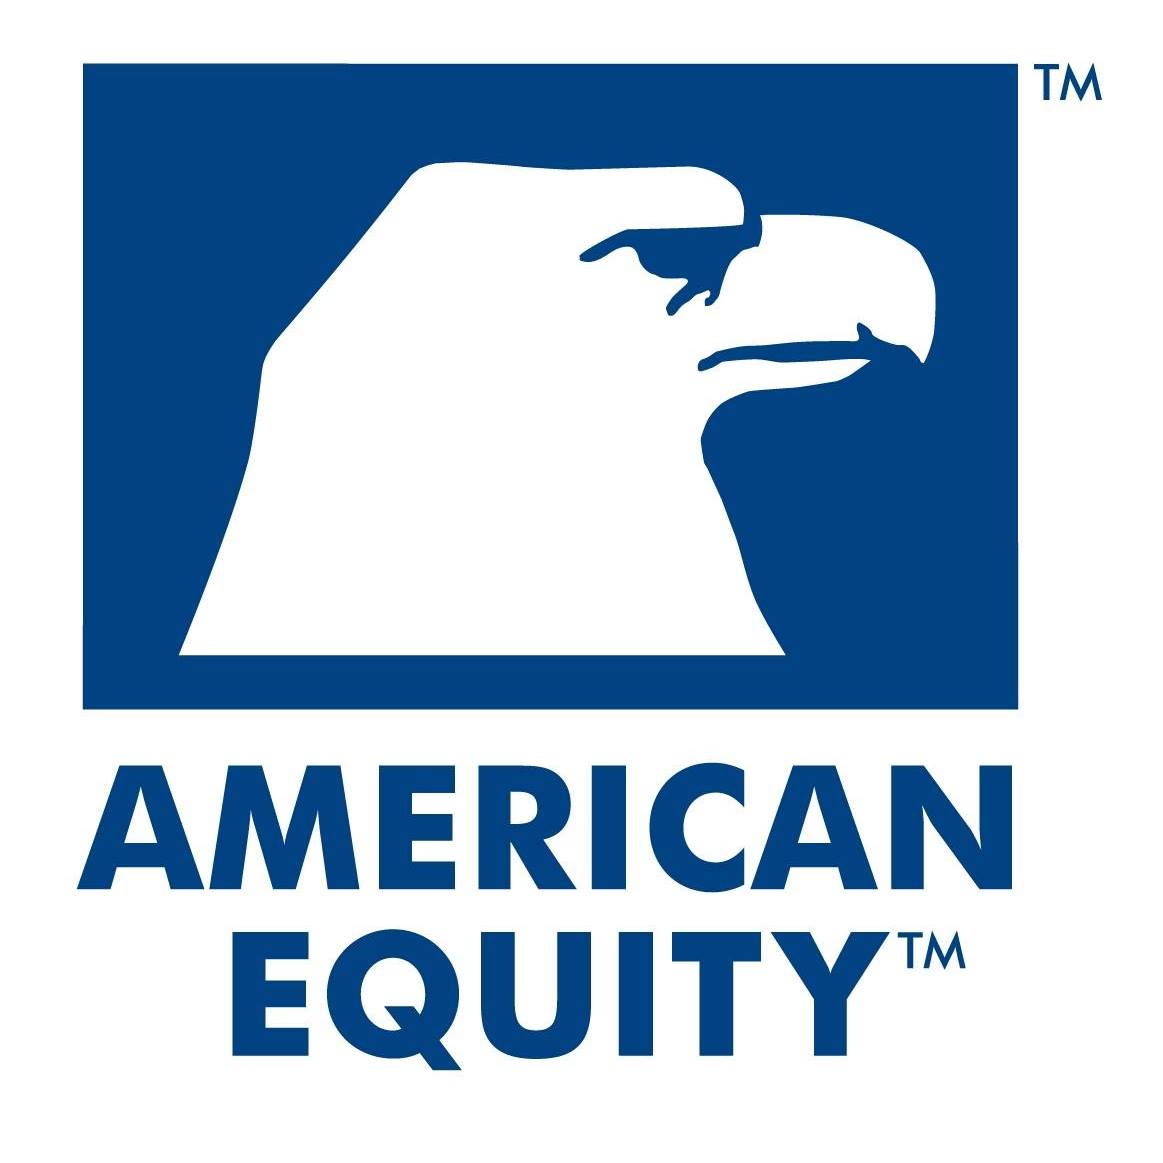 American Equity Investment